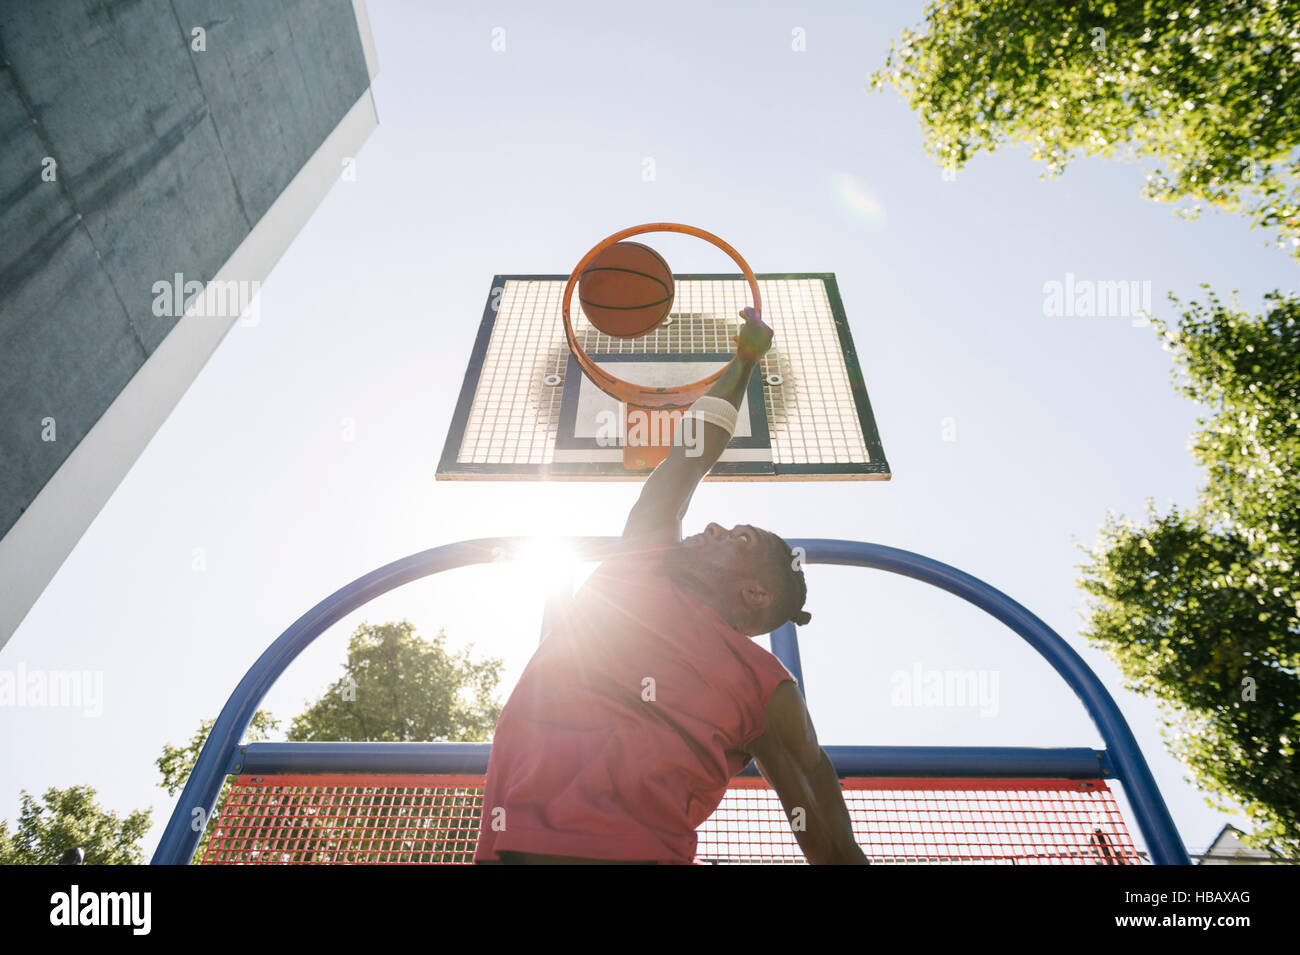 Young male basketball player throwing ball in sunlit basketball hoop Stock Photo